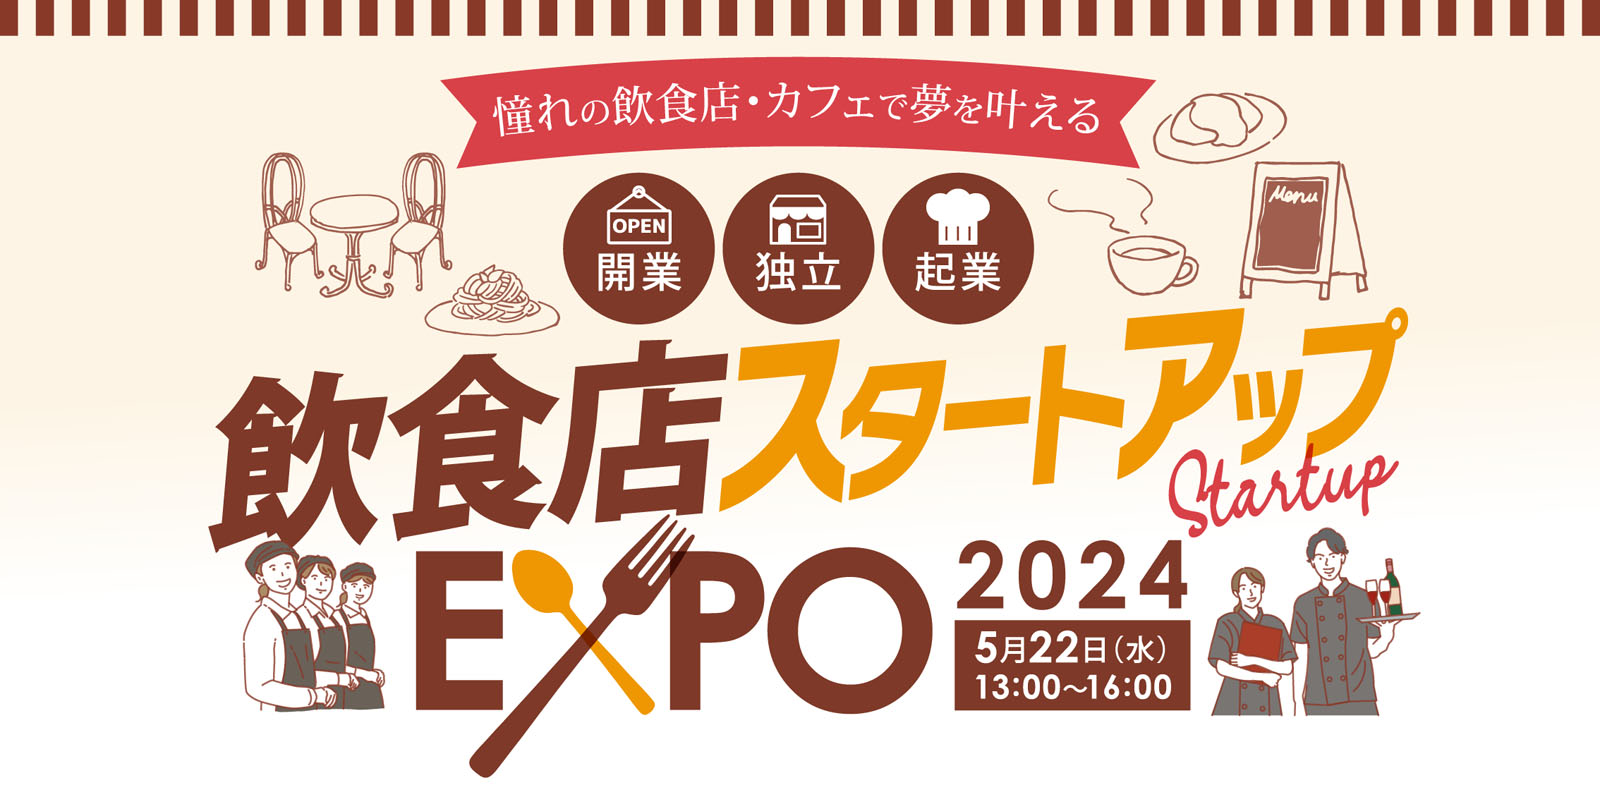 PC用 | 飲食店スタートアップEXPO